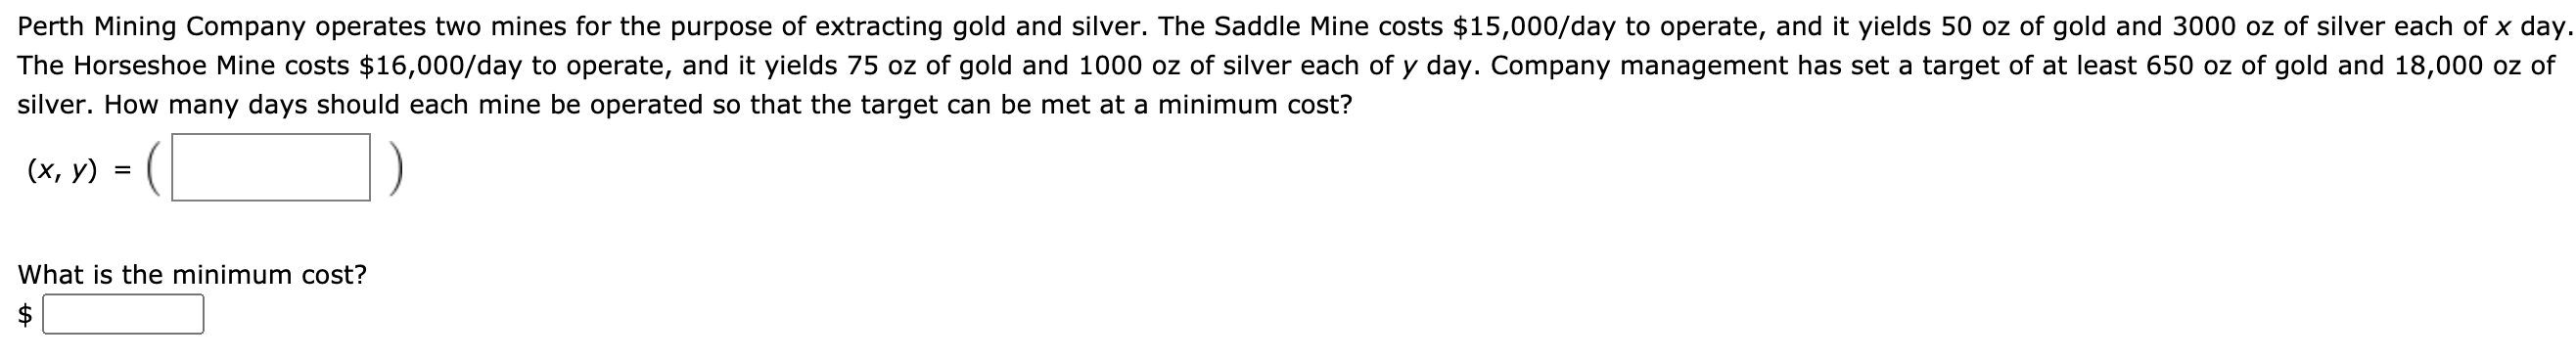 Perth Mining Company operates two mines for the purpose of extracting gold and silver. The Saddle Mine costs $15,000/day to operate, and it yields 50 oz of gold and 3000 oz of silver each of x day
The Horseshoe Mine costs $16,000/day to operate, and it yields 75 oz of gold and 1000 oz of silver each of y day. Company management has set a target of at least 650 oz of gold and 18,000 oz of
silver. How many days should each mine be operated so that the target can be met at a minimum cost?
(х, у)
%D
What is the minimum cost?
$
